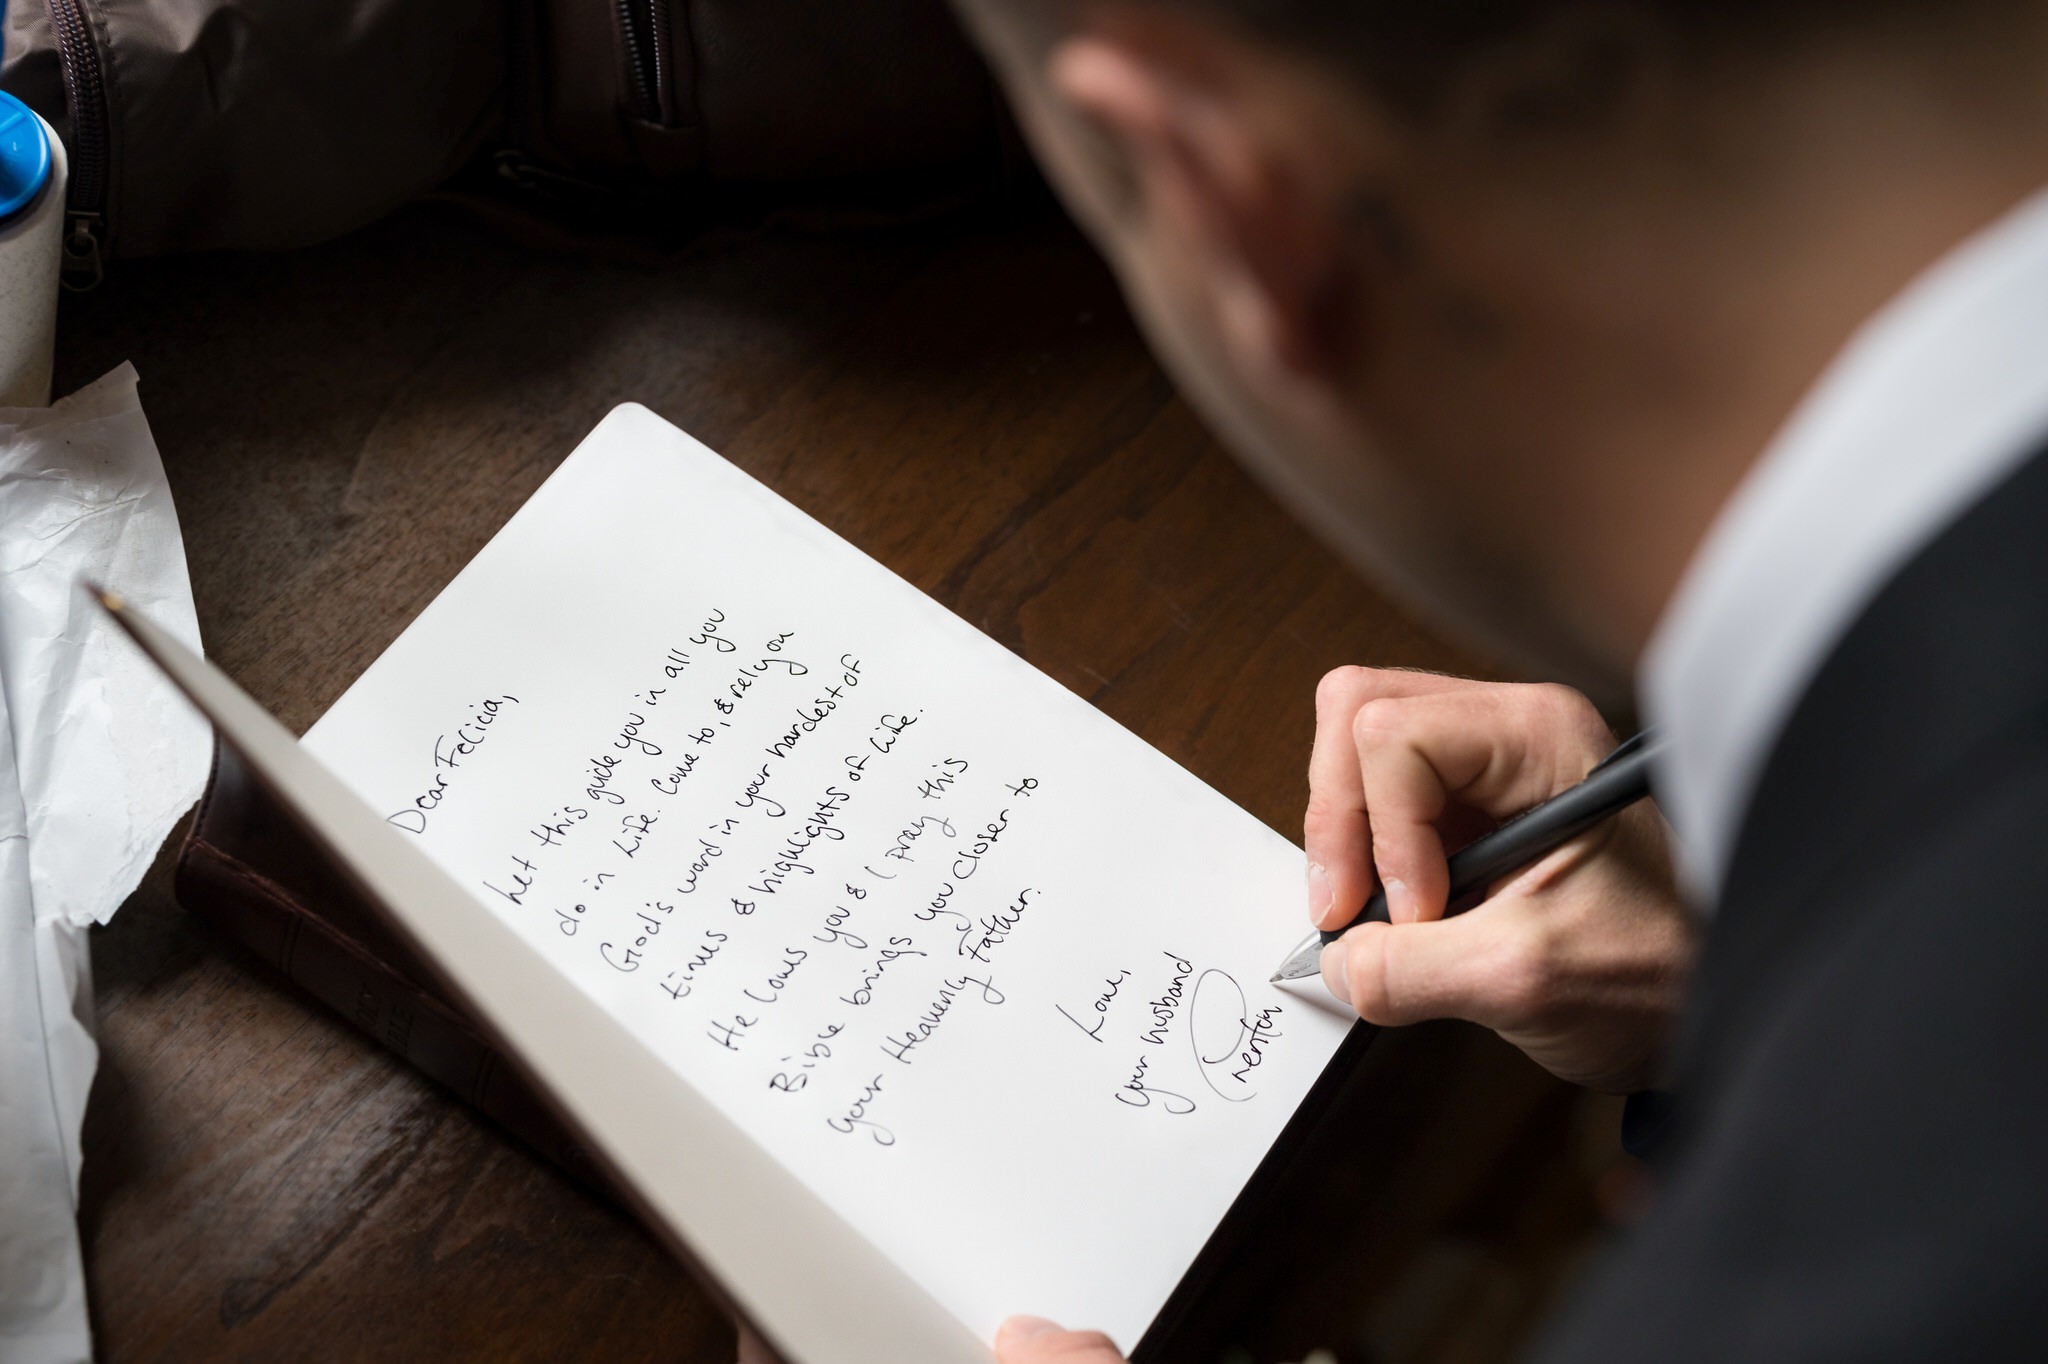 A groom leaves a note in a Bible for his wife to read as a wedding day gift.  